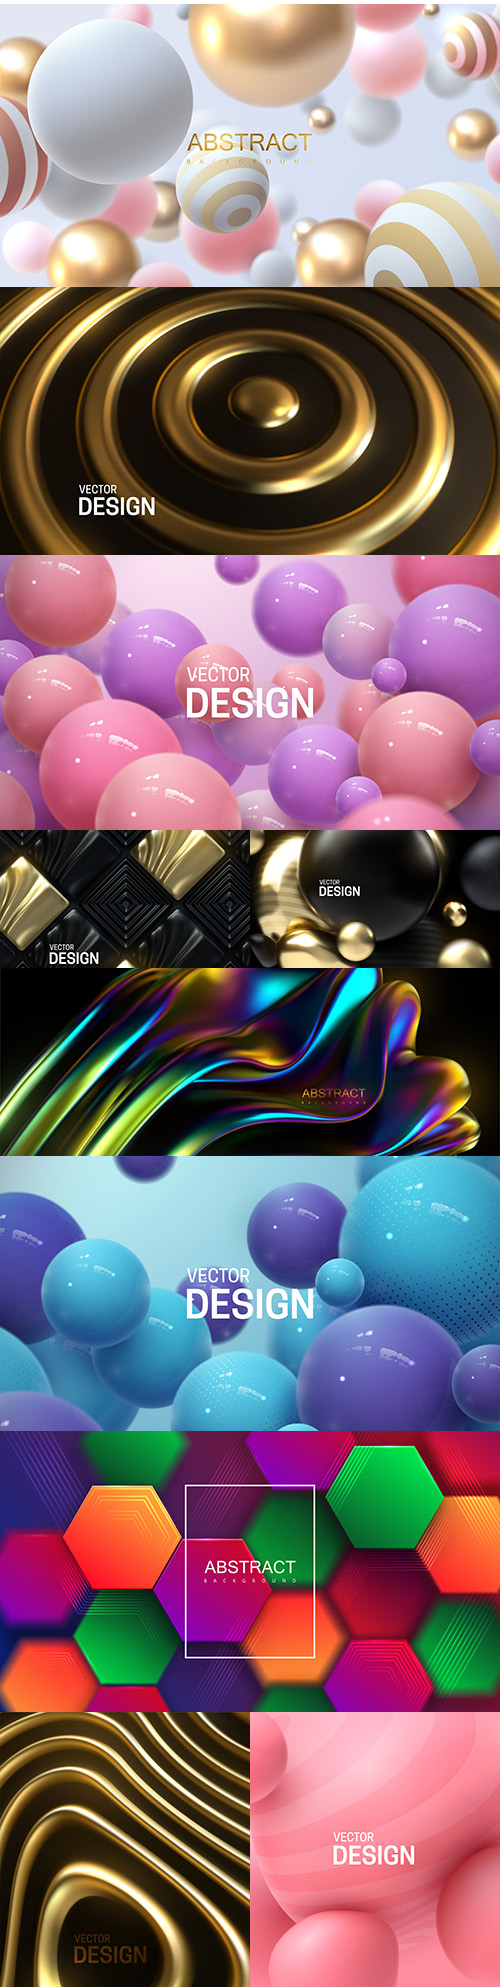 Abstract background with bouncing 3d spheres illustration